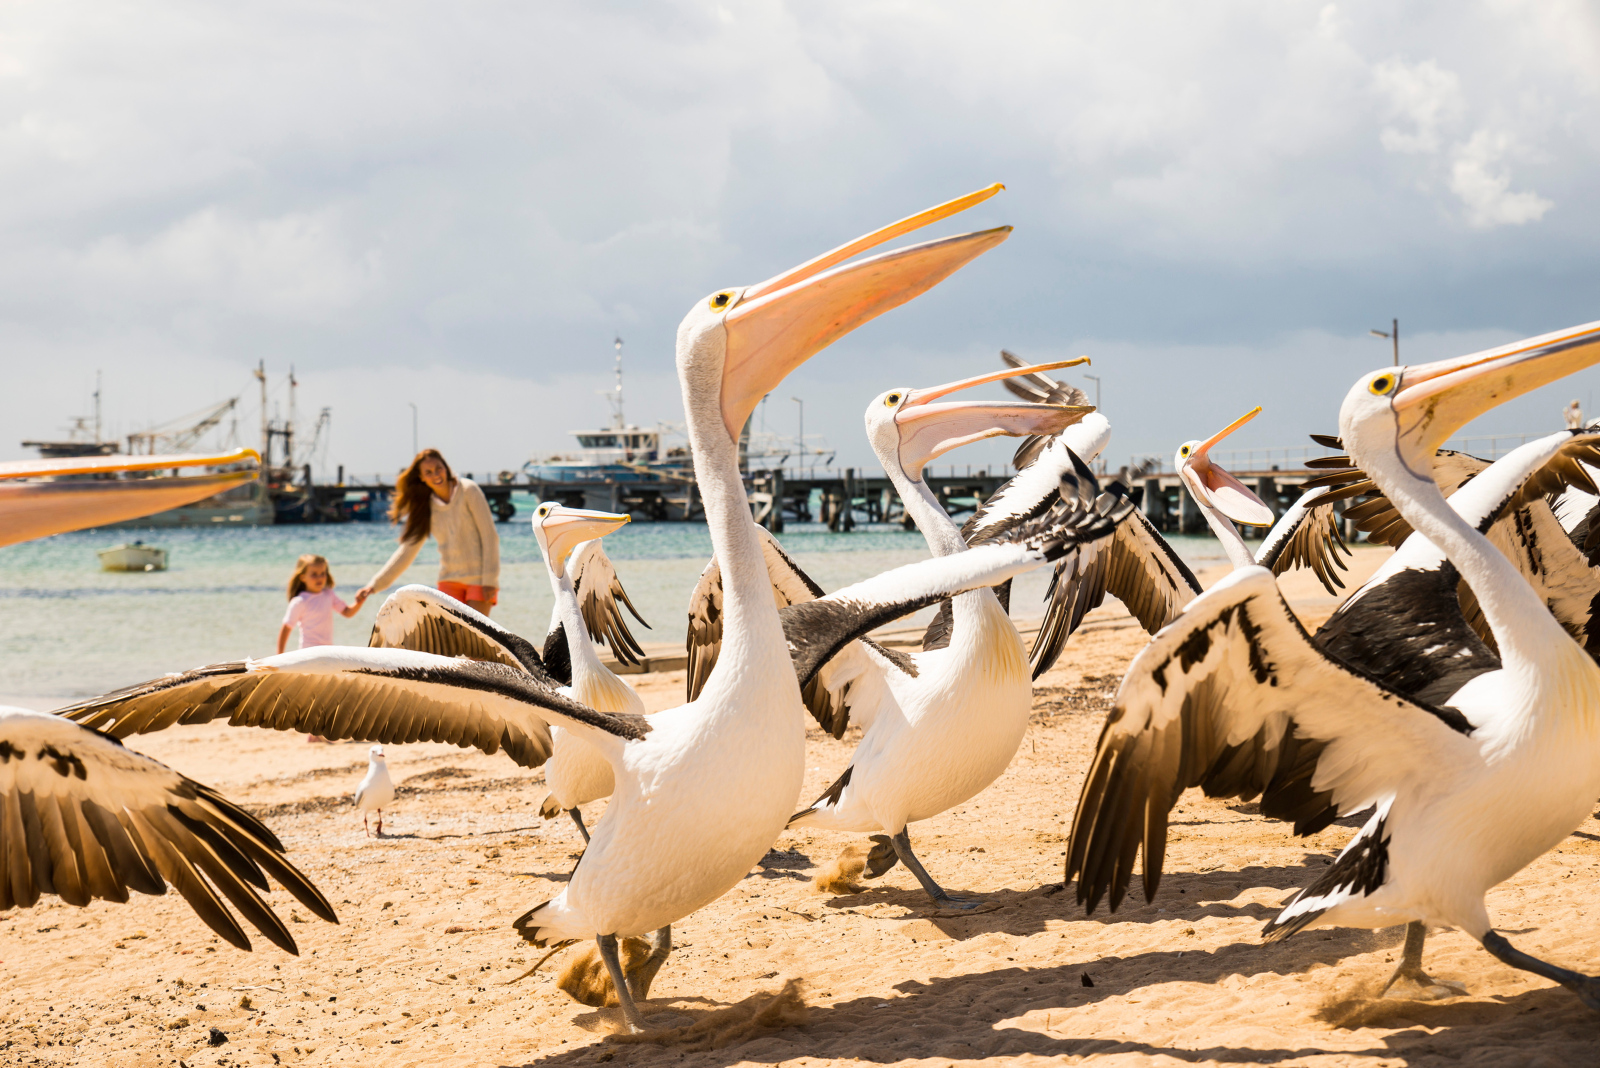 A group of pelicans on the beach at Venus Bay, Eyre Peninsula